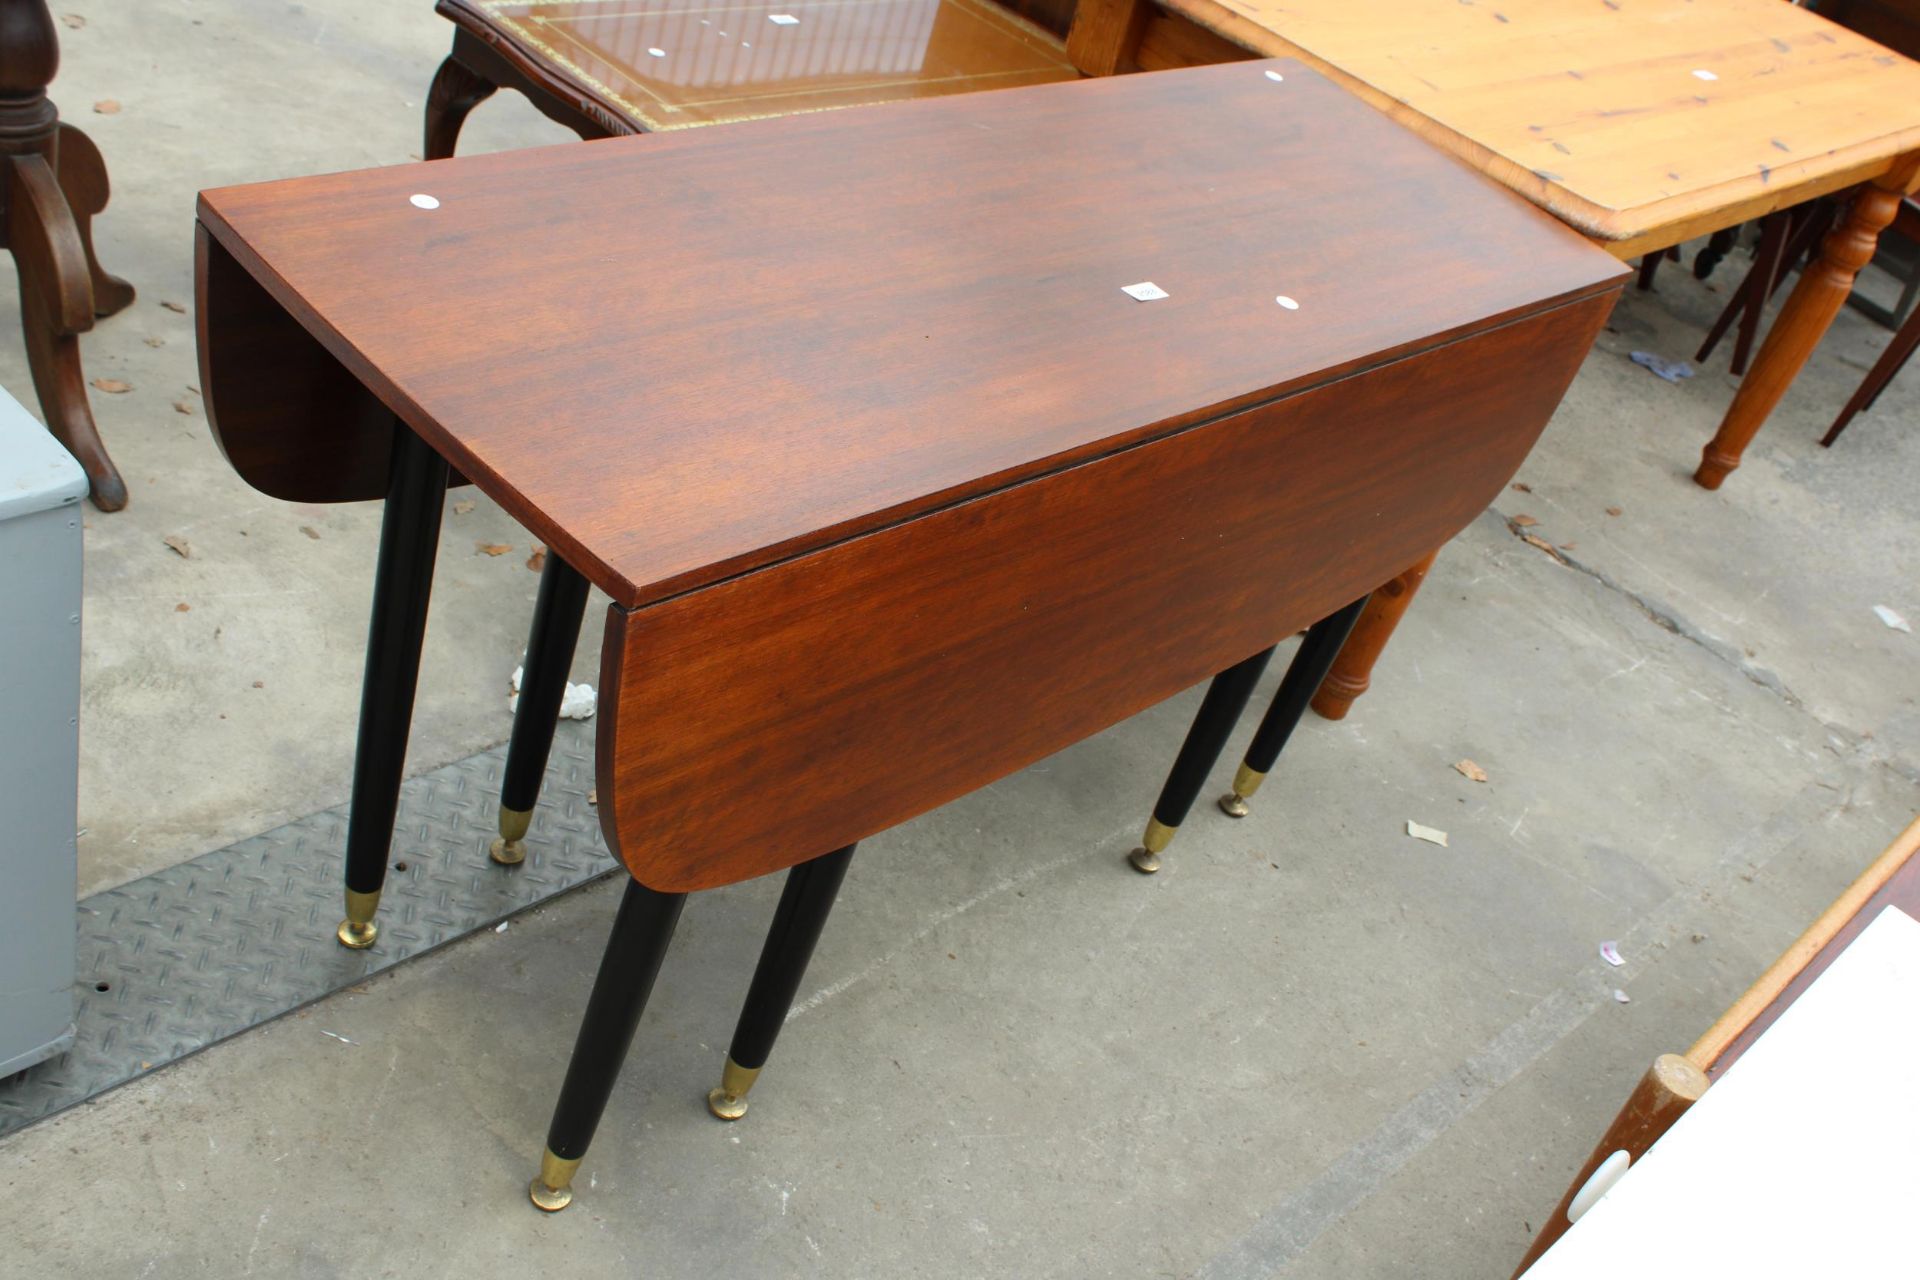 A RETRO TOLA WOOD POSSIBLY G PLAN E GOMME LIBRENZA (NO LABEL) DROP LEAF DINING TABLE ON BLACK